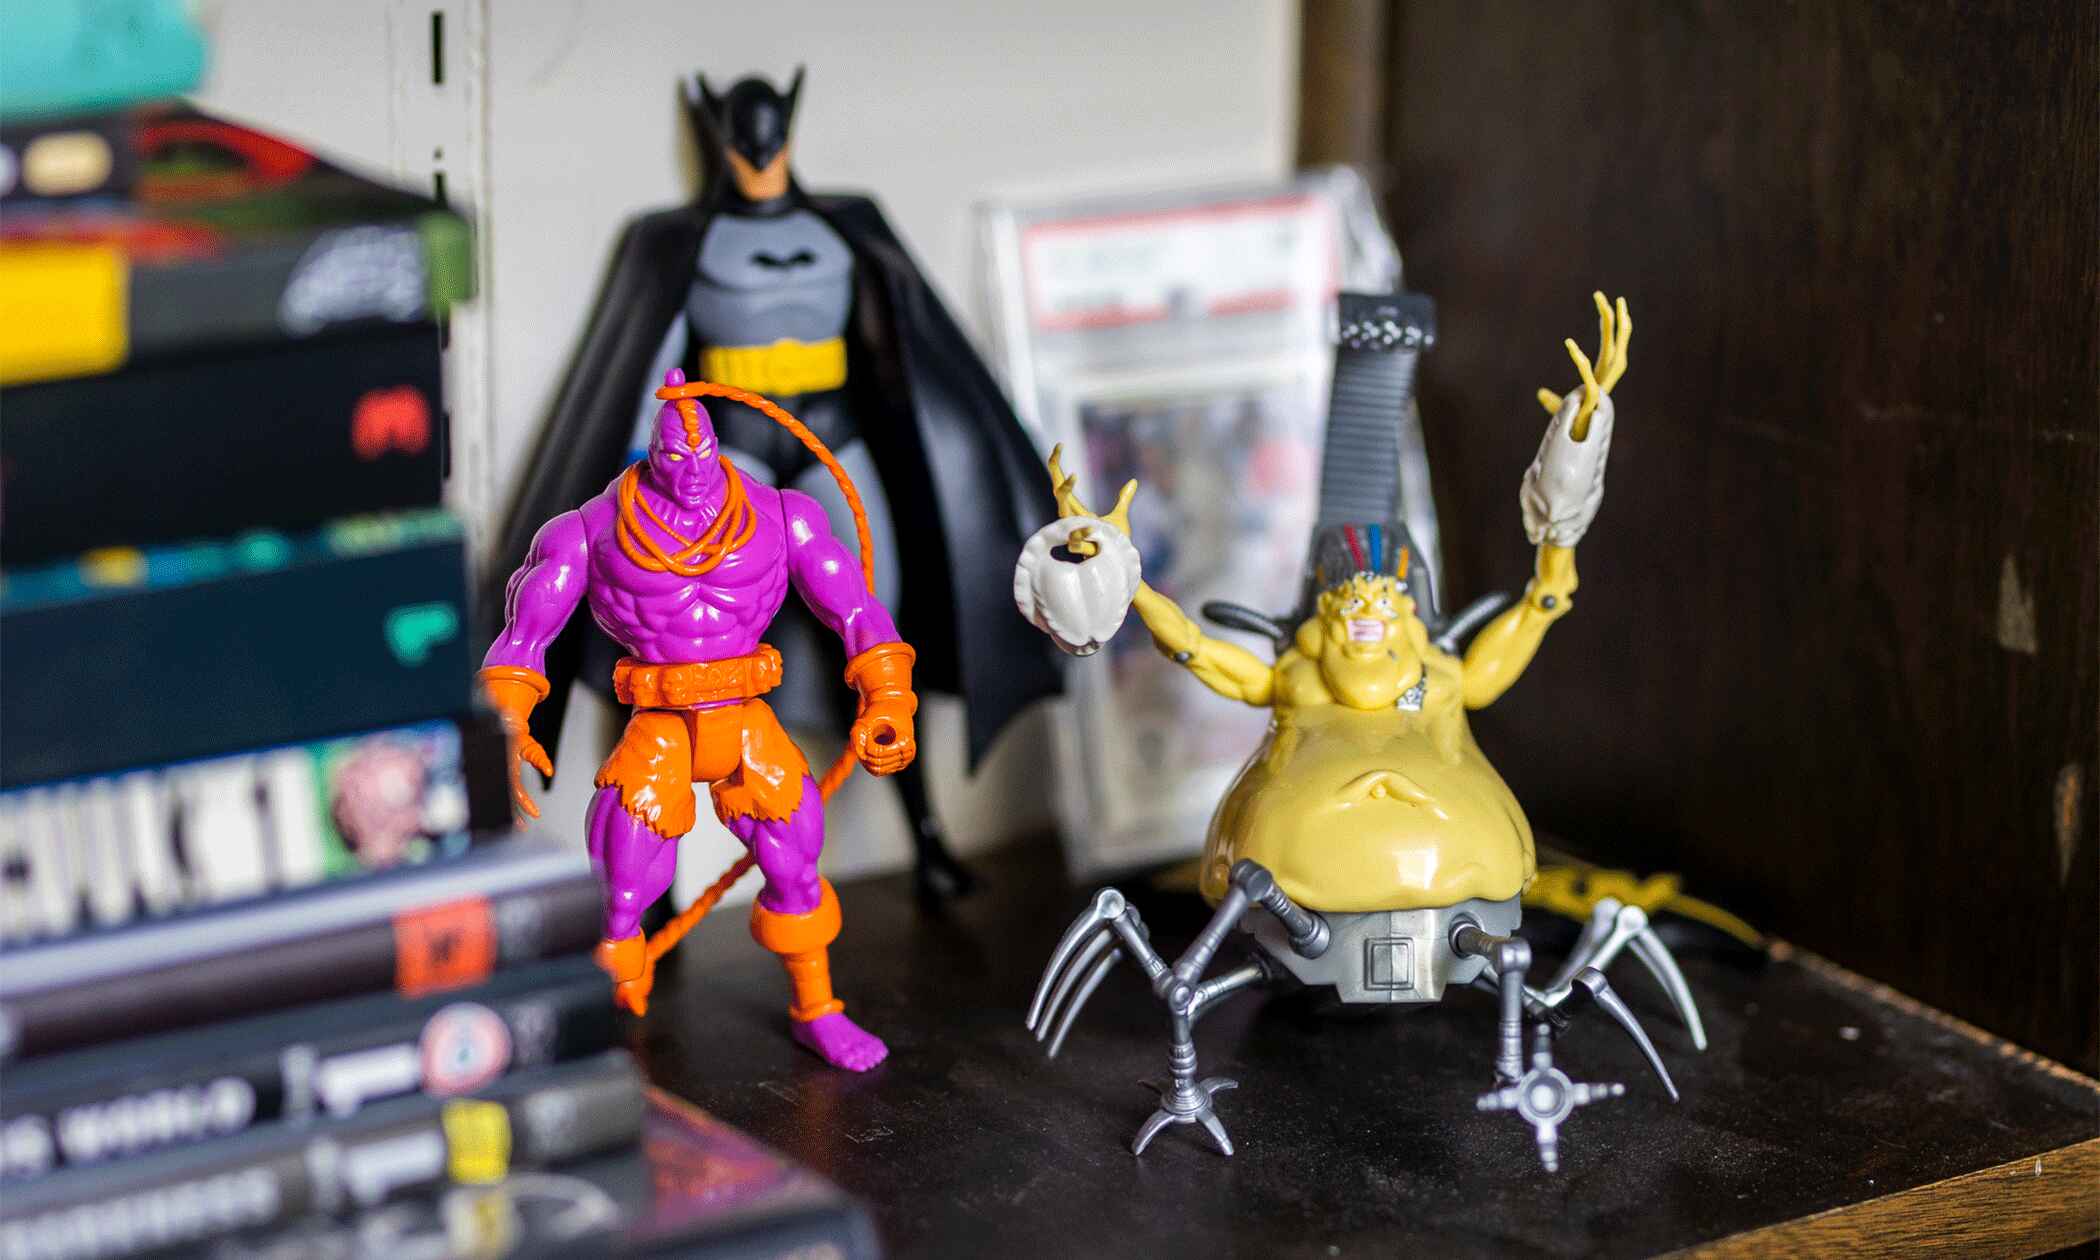 Two action figures